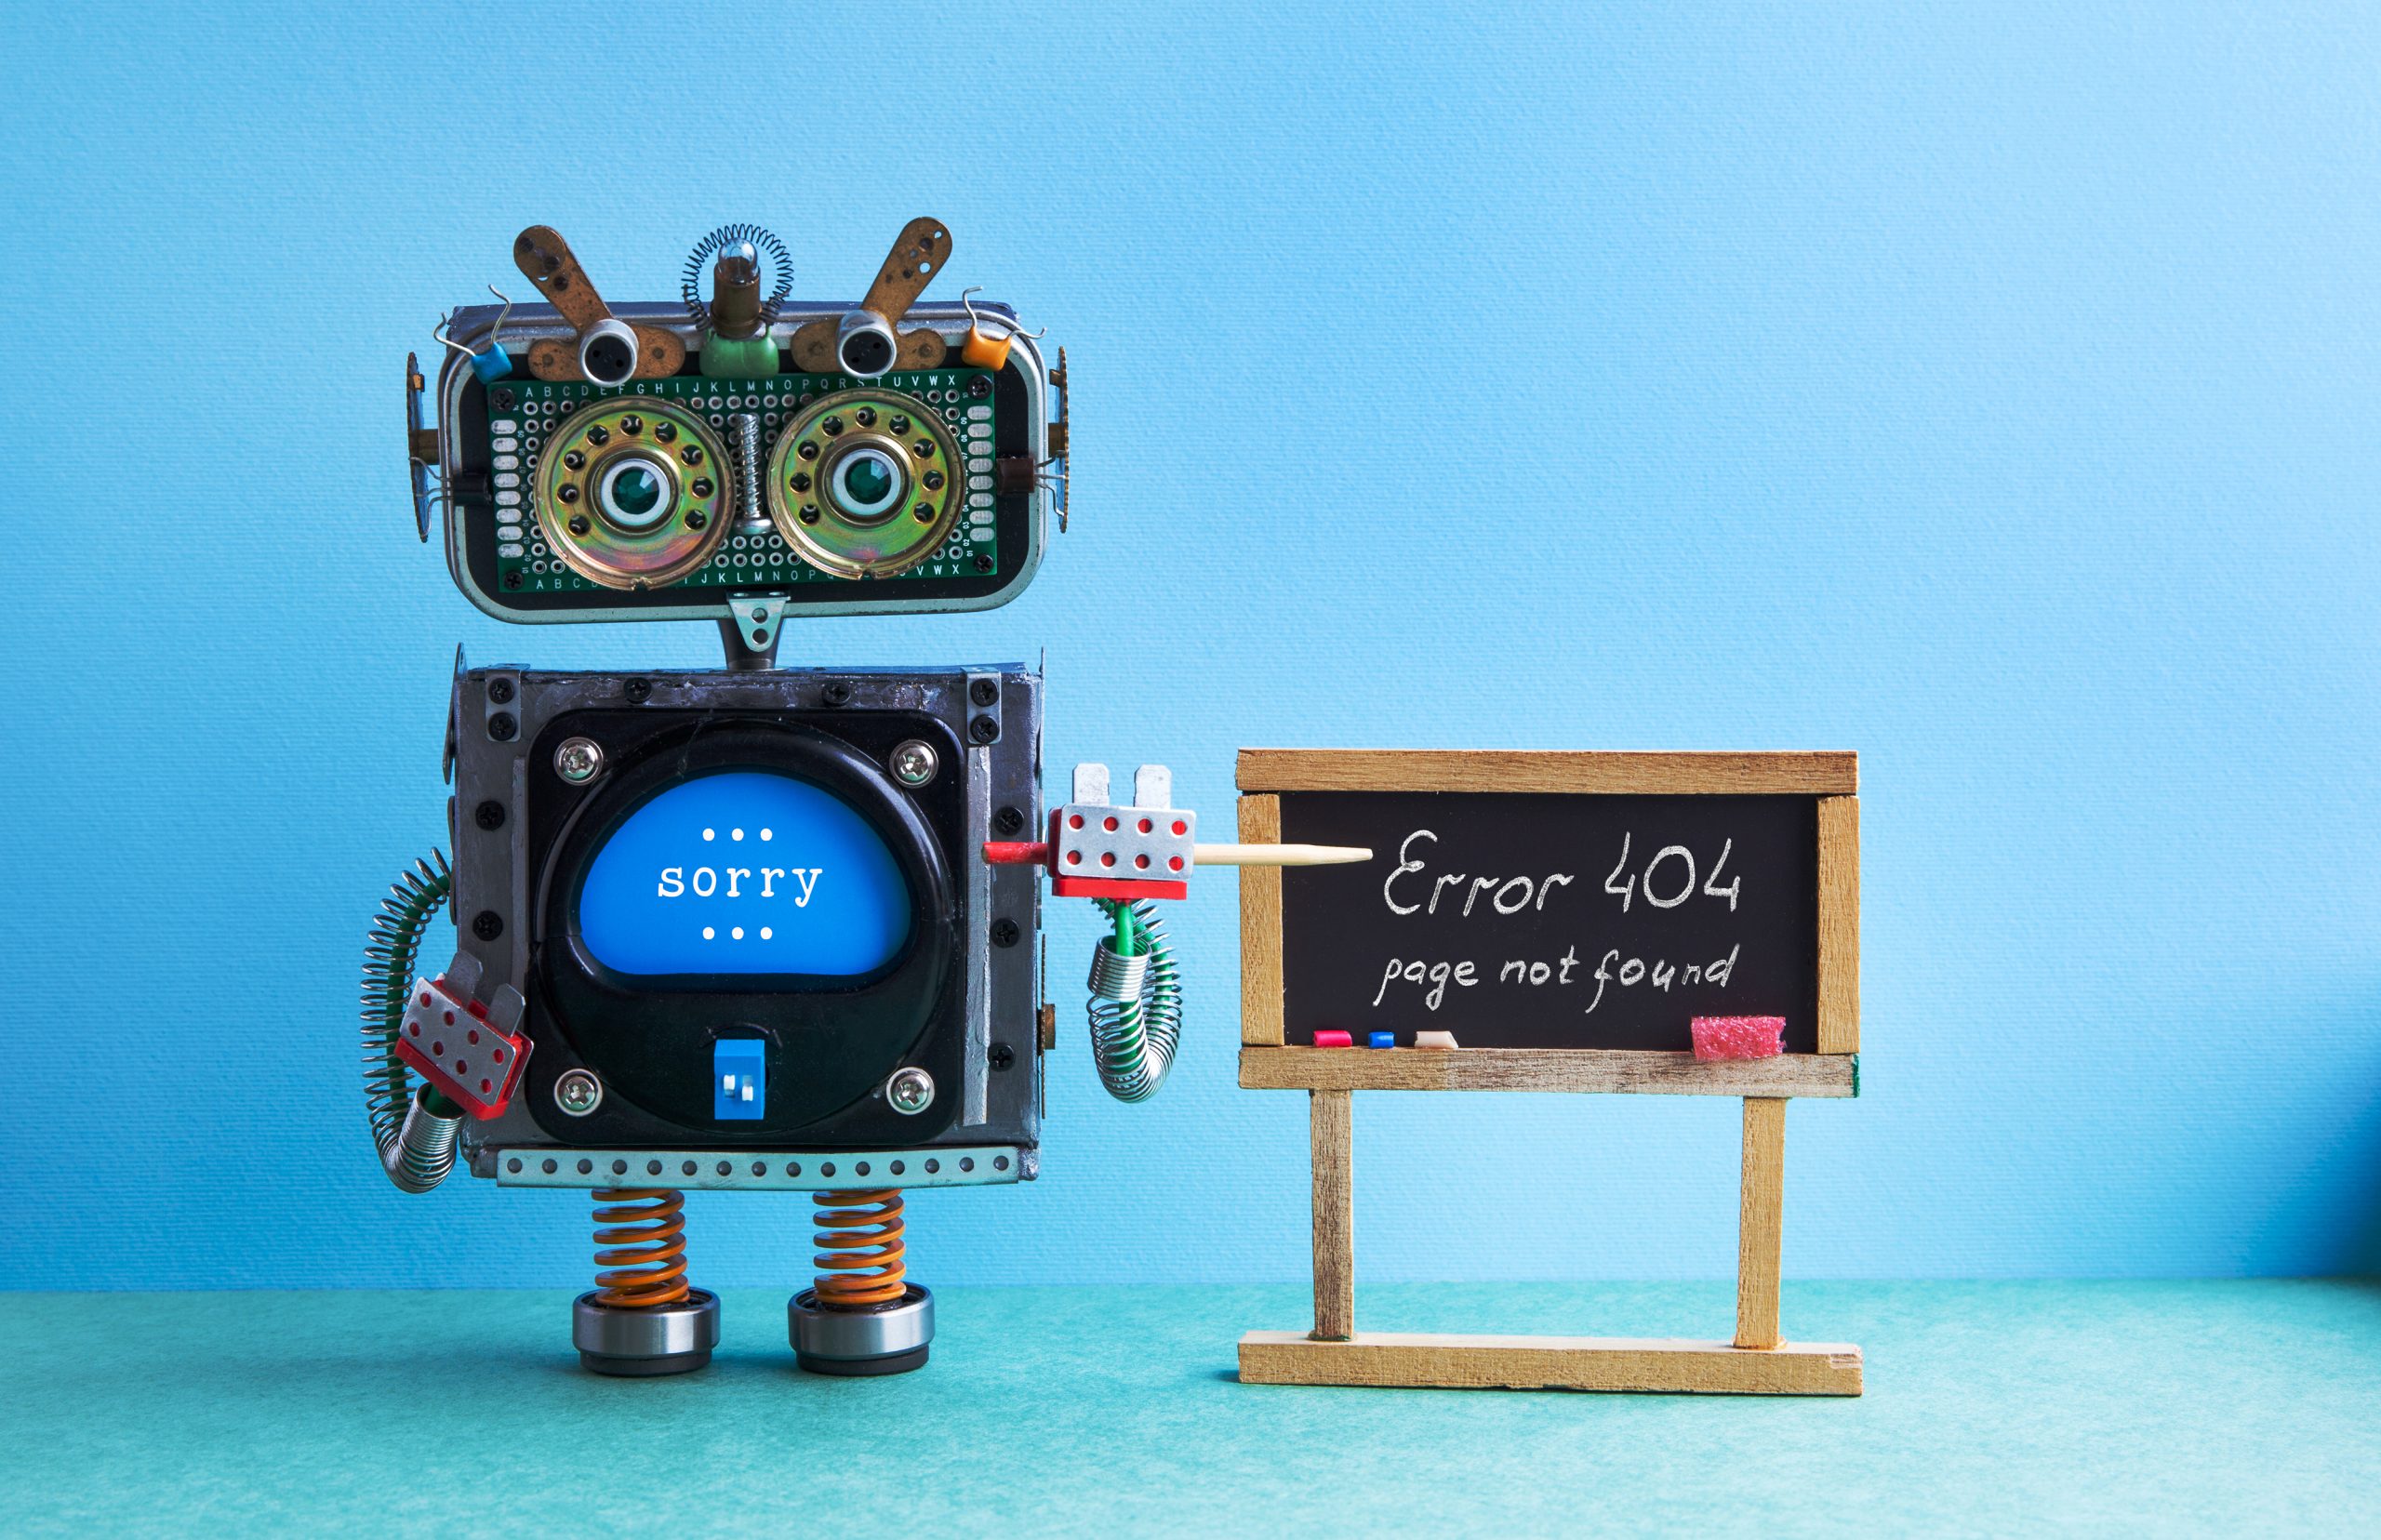 404 error page not found robot teacher with point 2021 08 26 22 27 21 utc 1 scaled About Us